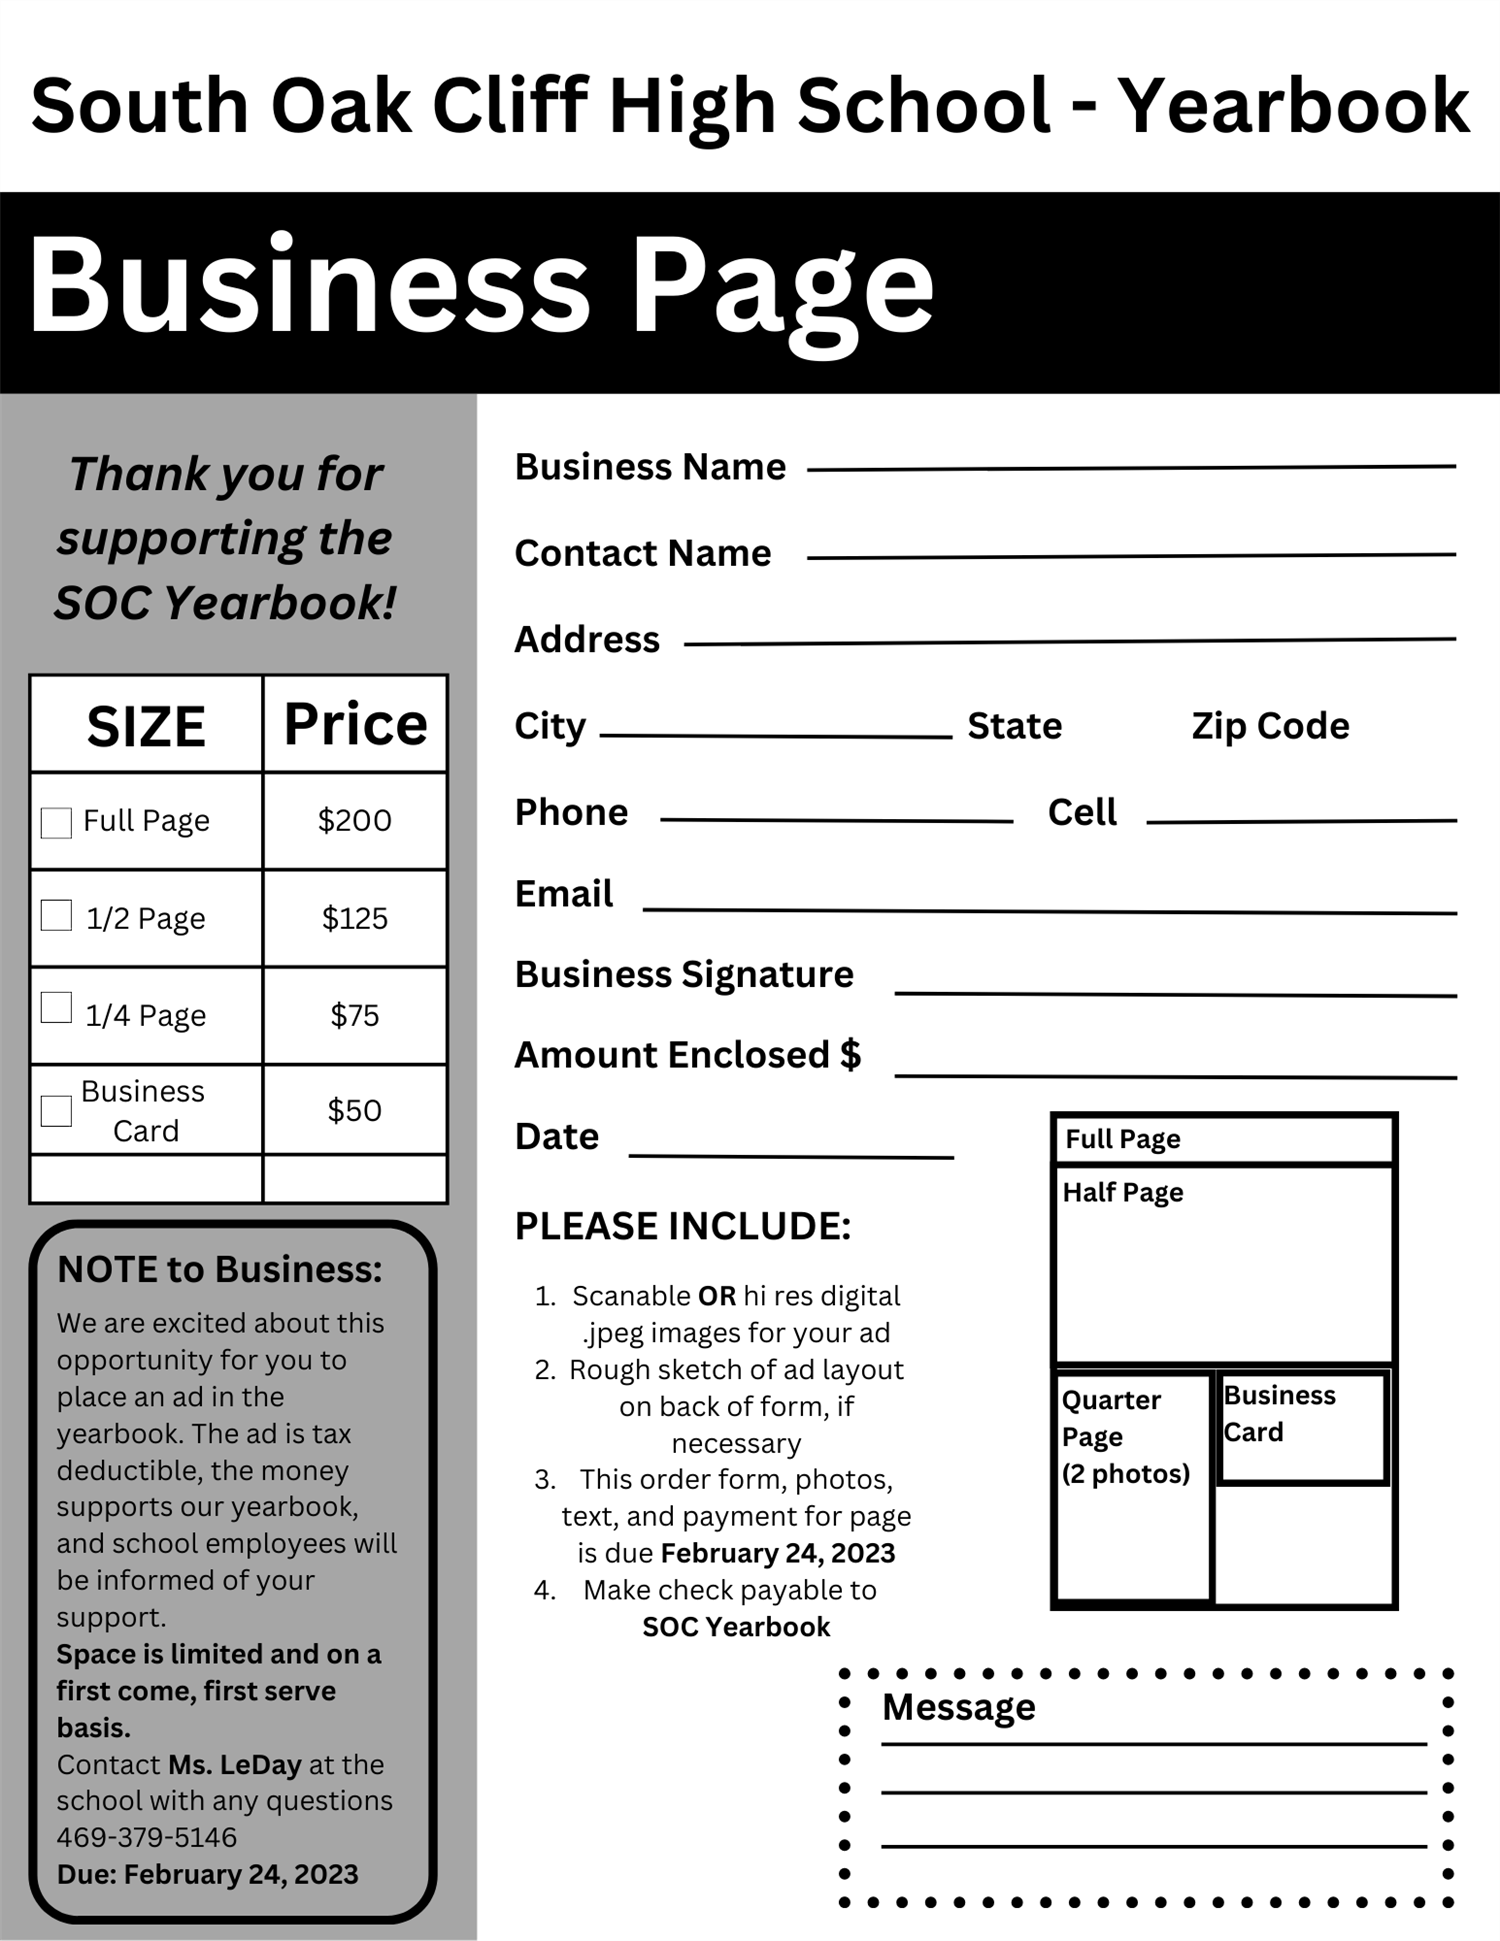 BUSINESS AD PART 1